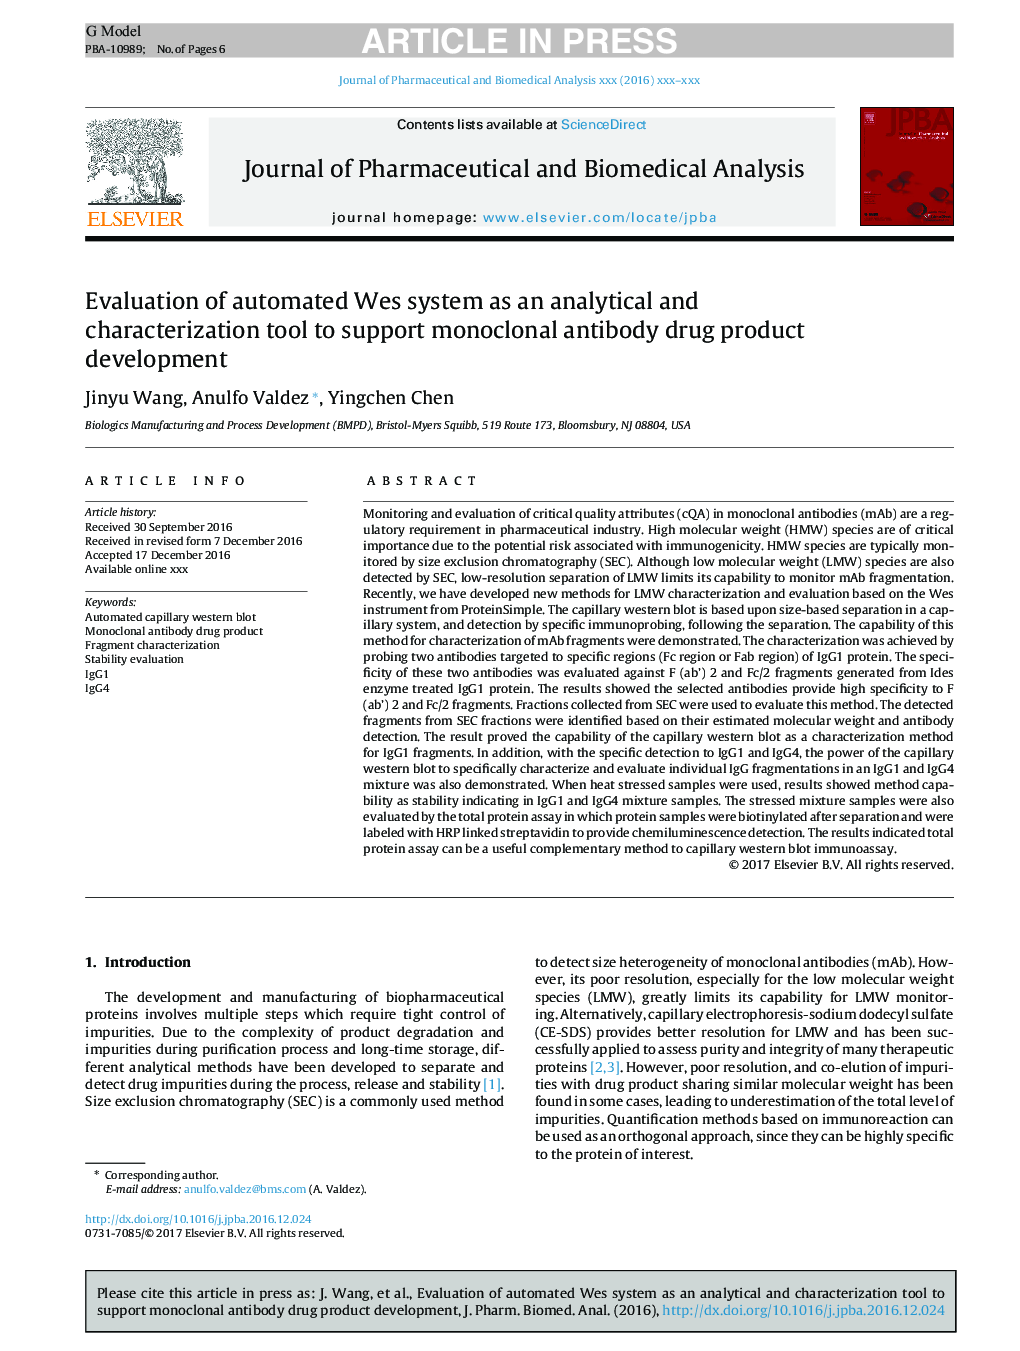 Evaluation of automated Wes system as an analytical and characterization tool to support monoclonal antibody drug product development